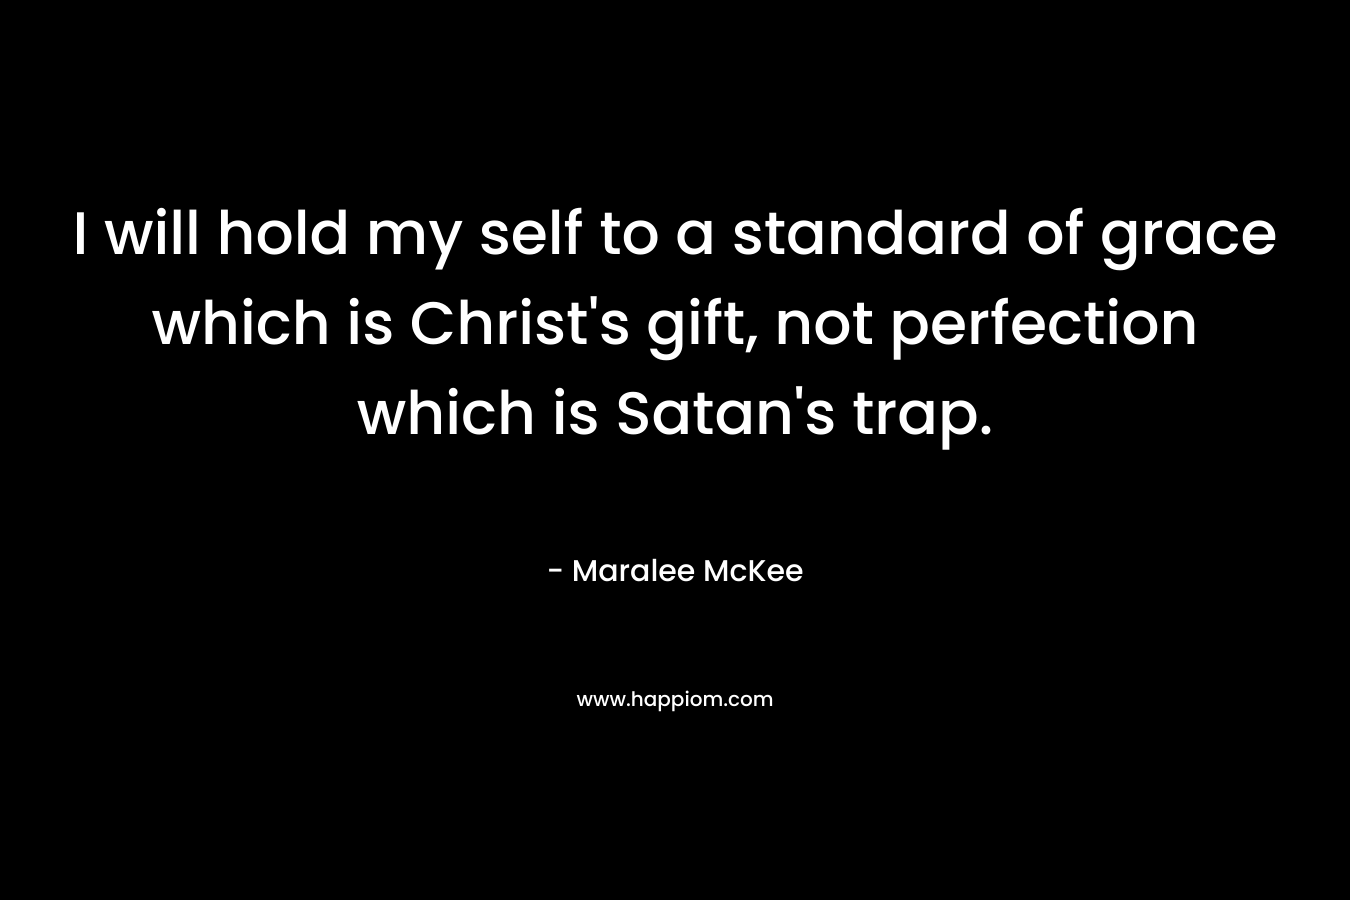 I will hold my self to a standard of grace which is Christ's gift, not perfection which is Satan's trap.